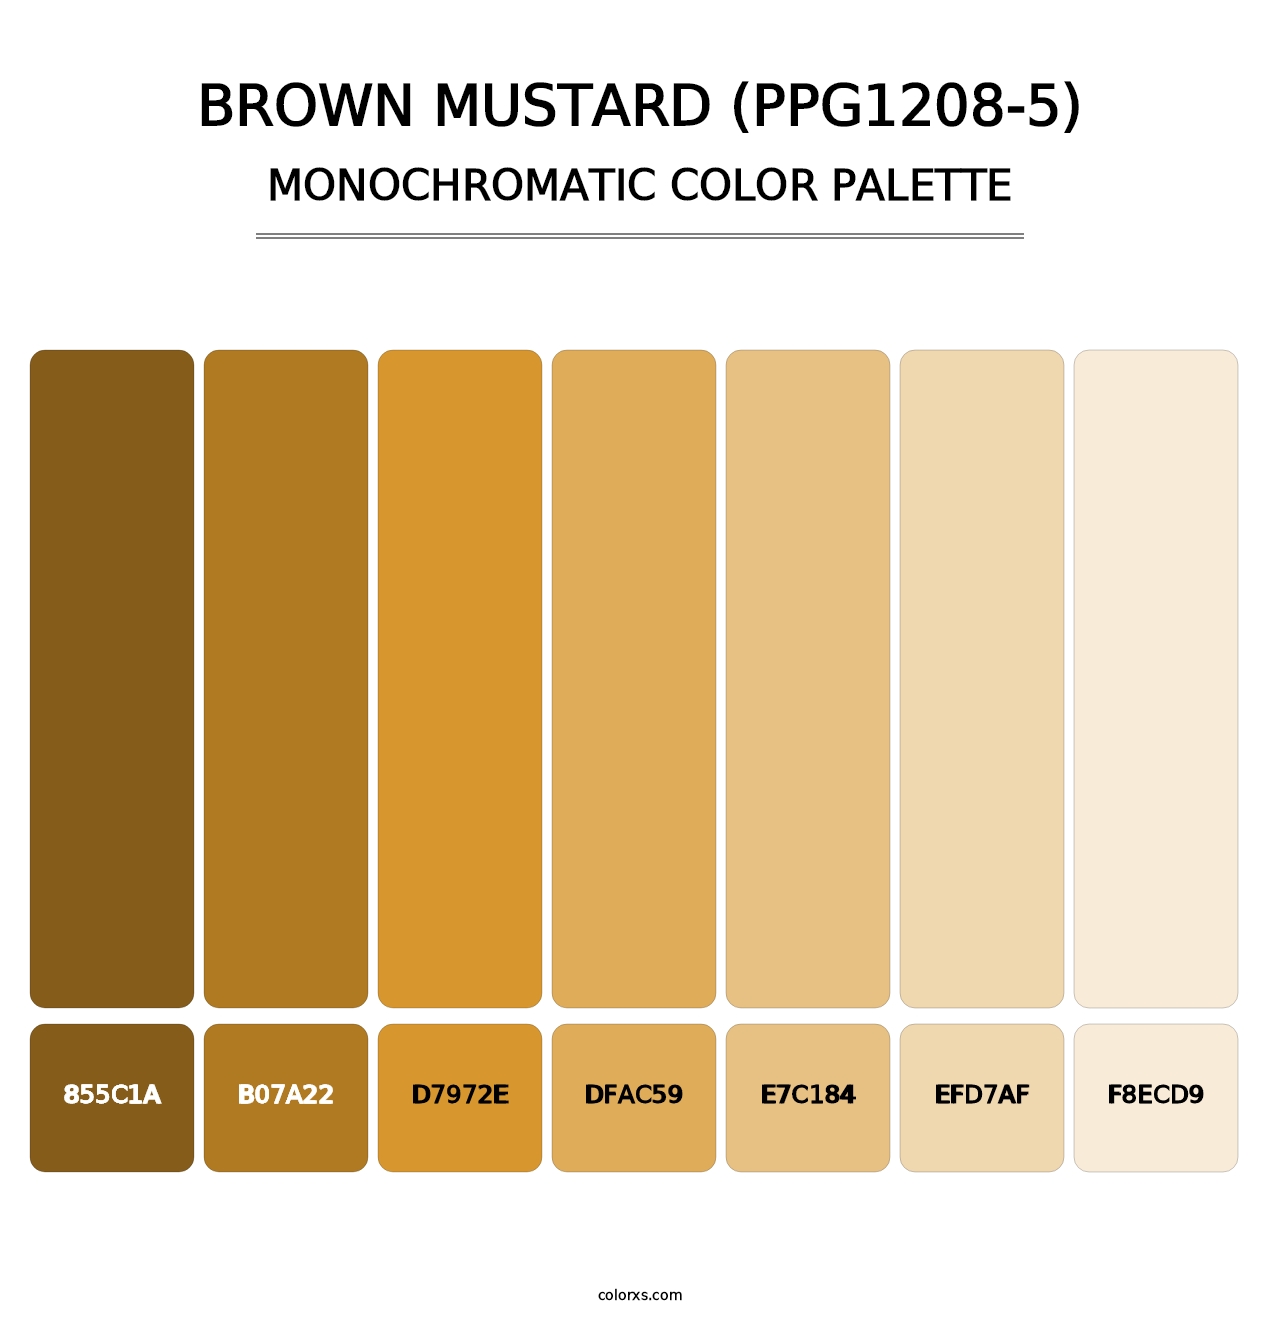 Brown Mustard (PPG1208-5) - Monochromatic Color Palette